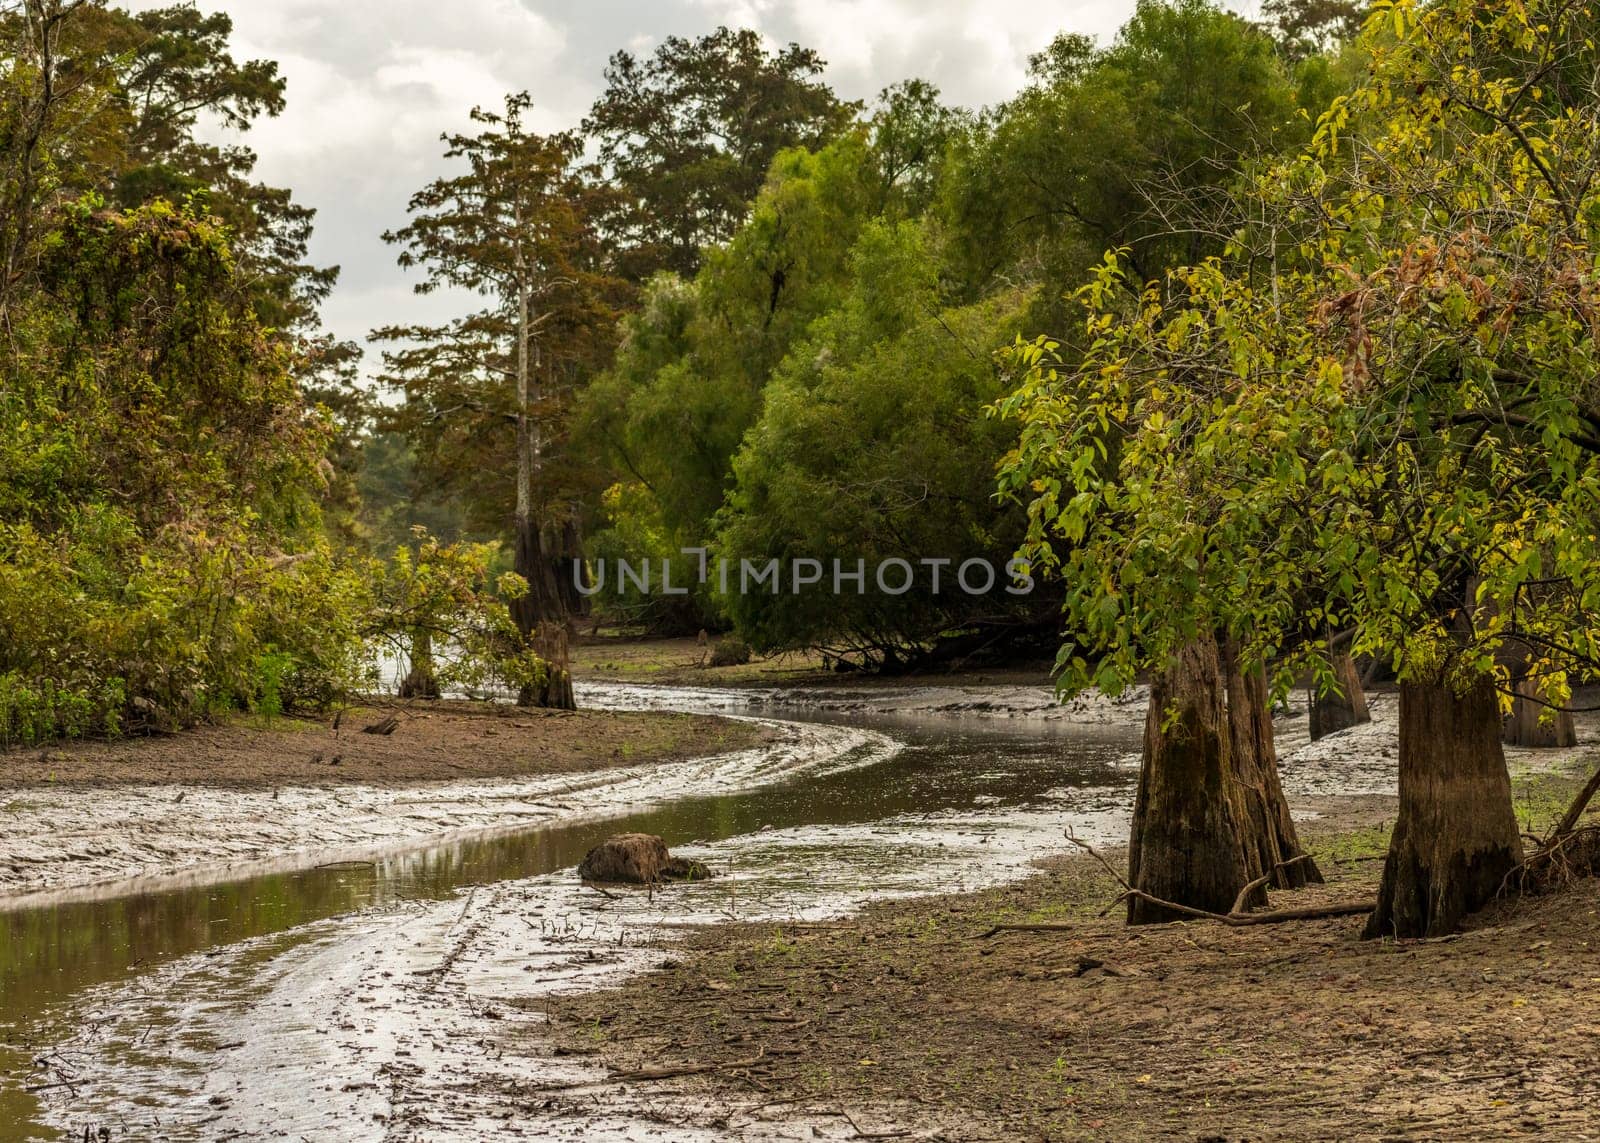 Muddy channel or pathway taken by airboat tours of the bayou of Atchafalaya Basin near Baton Rouge Louisiana